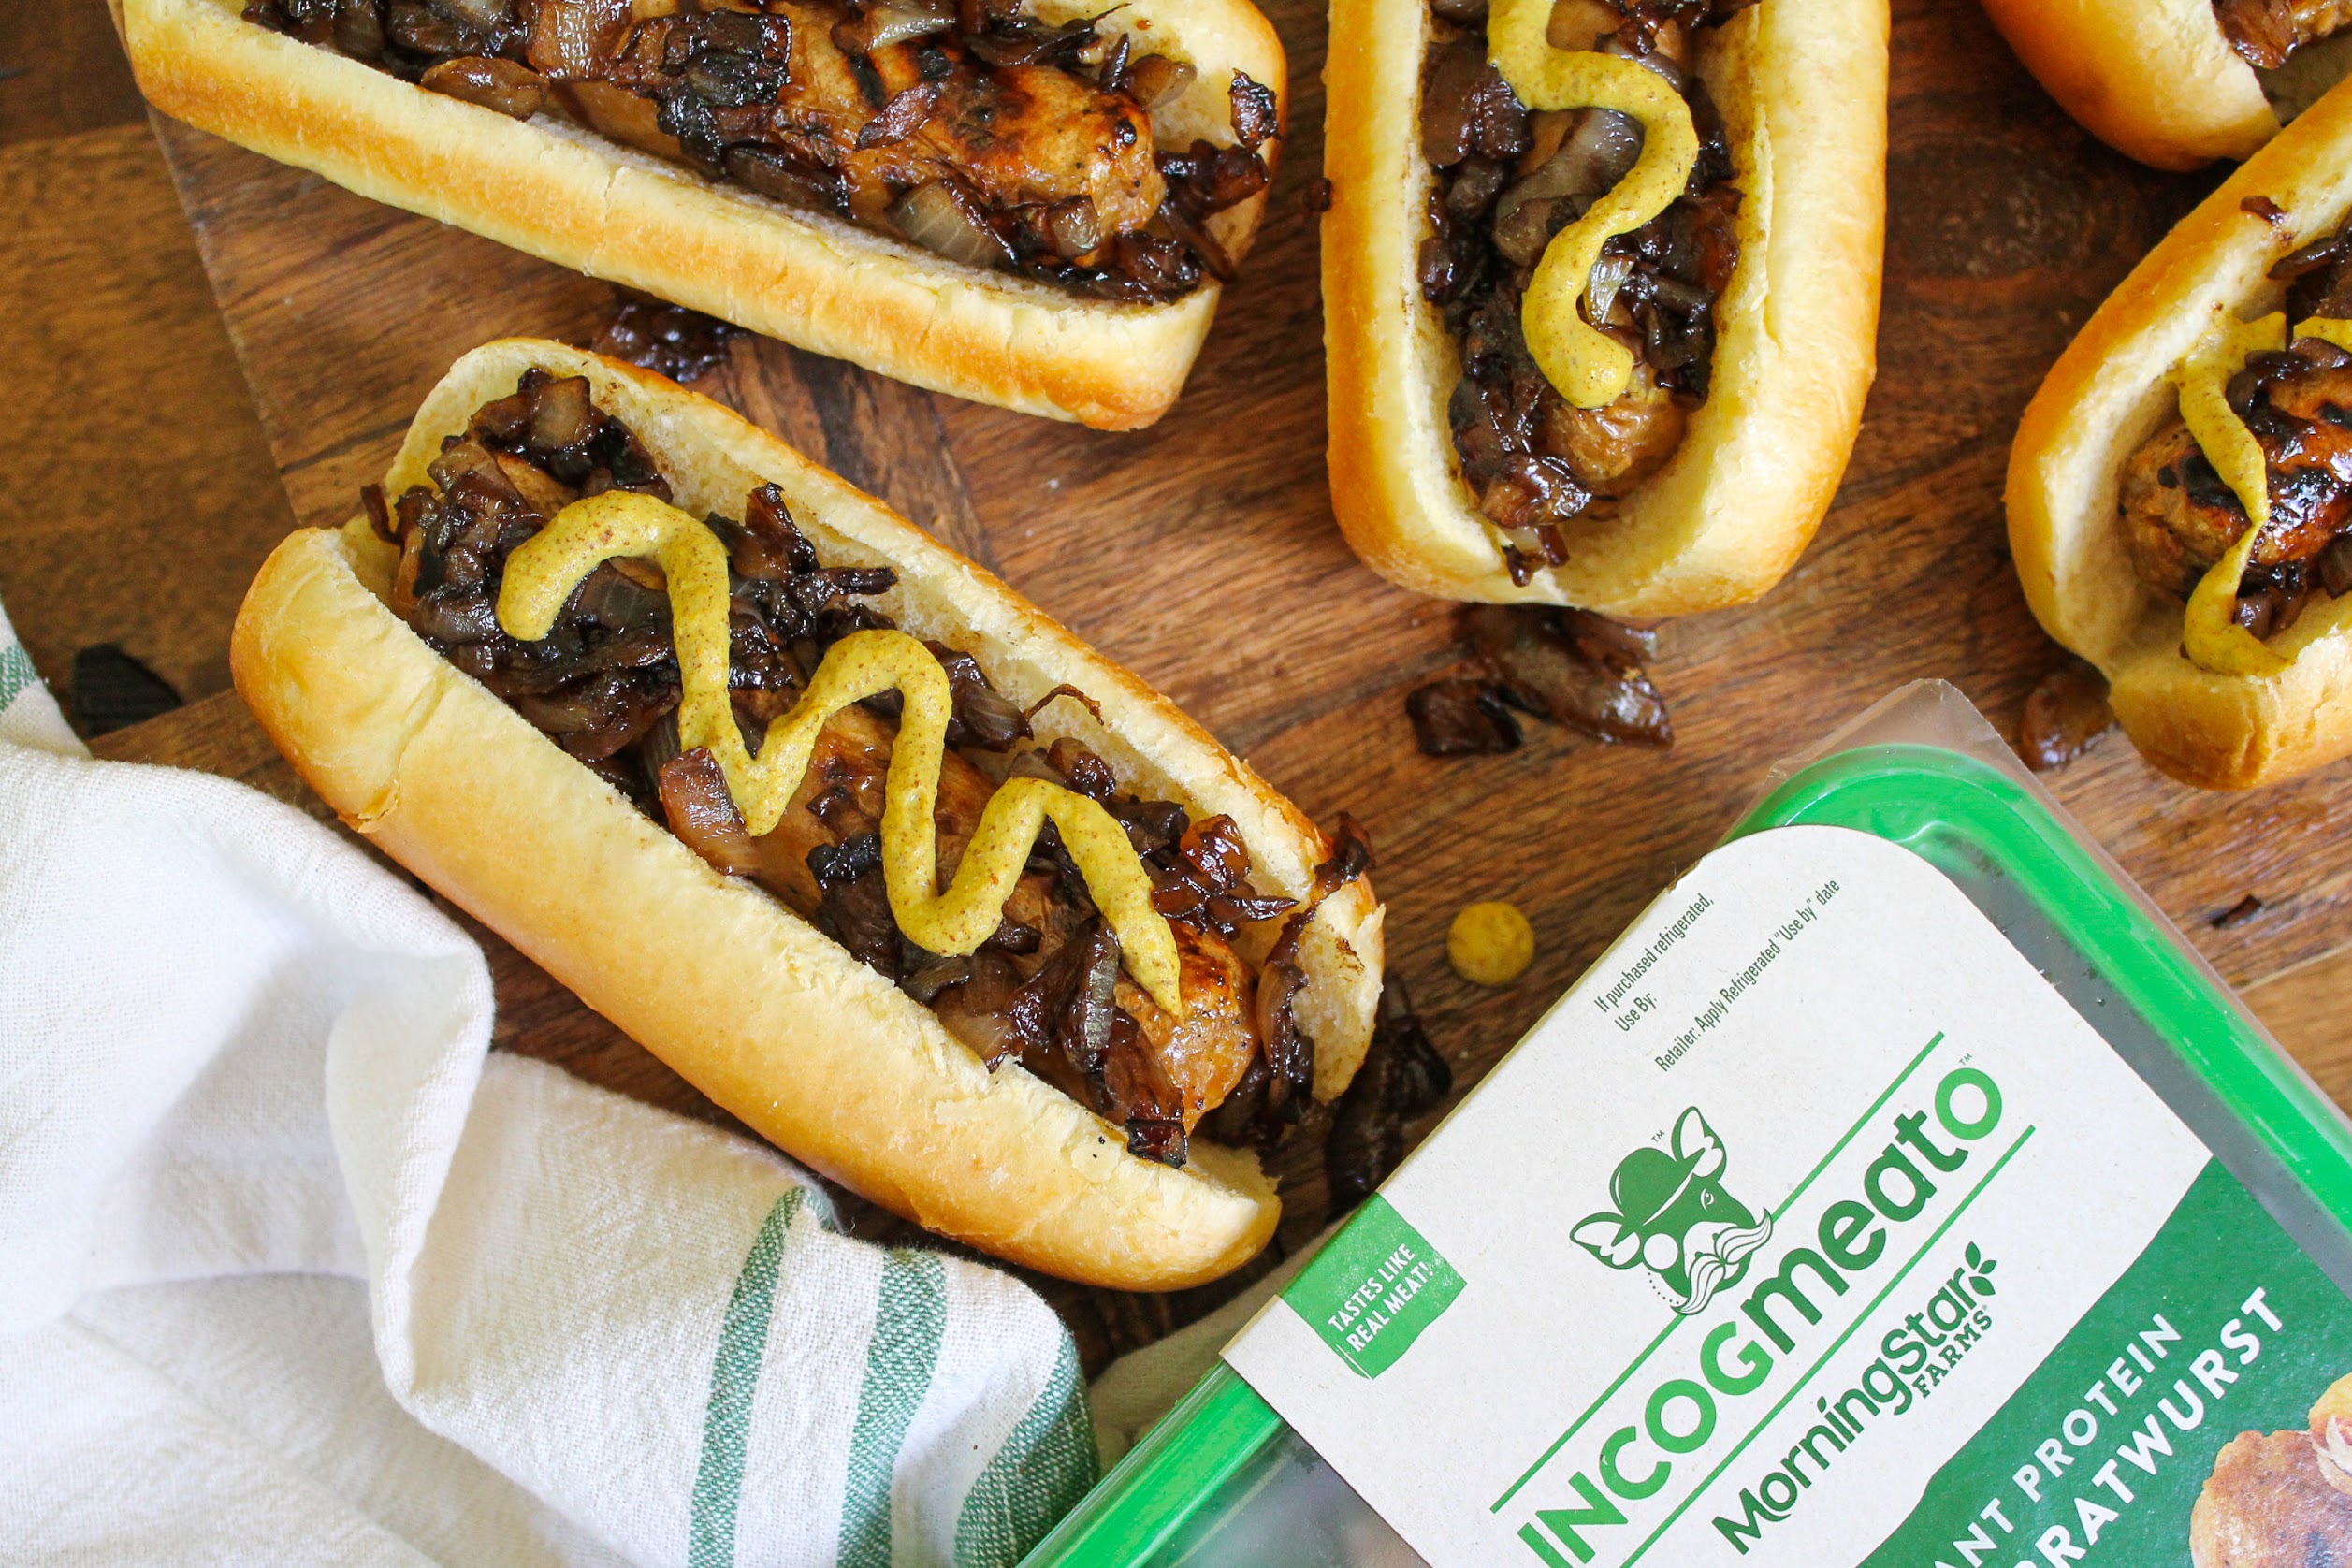 Incogmeato Bratwurst and Italian Sausage Products Are Available At Select Publix Stores - Tasty, Juicy And 100% Plant Based! on I Heart Publix 1